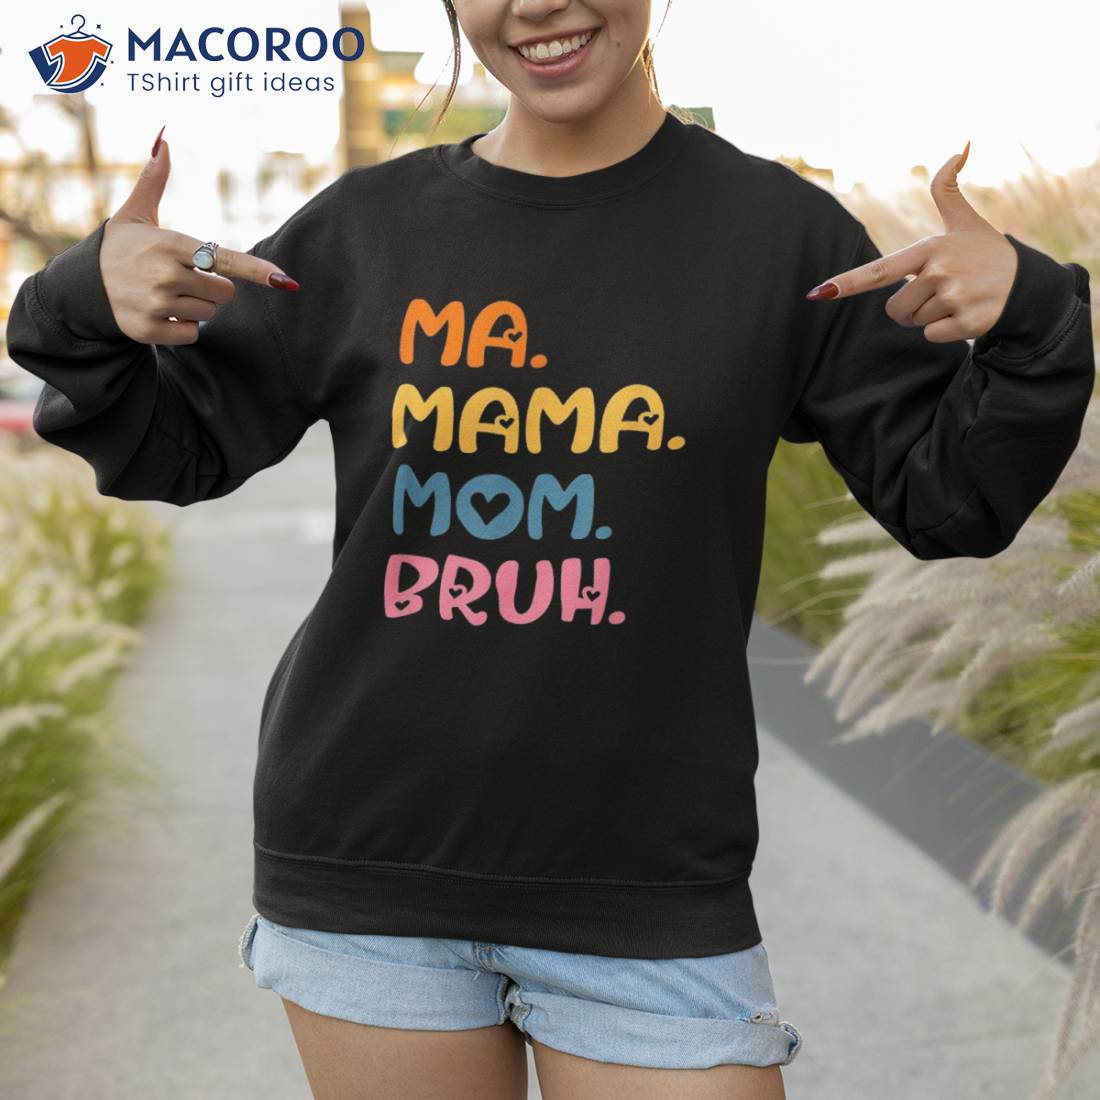 https://images.macoroo.com/wp-content/uploads/2023/05/ma-mama-mom-bruh-mother-mommy-mother-s-day-humor-and-funny-shirt-sweatshirt.jpg